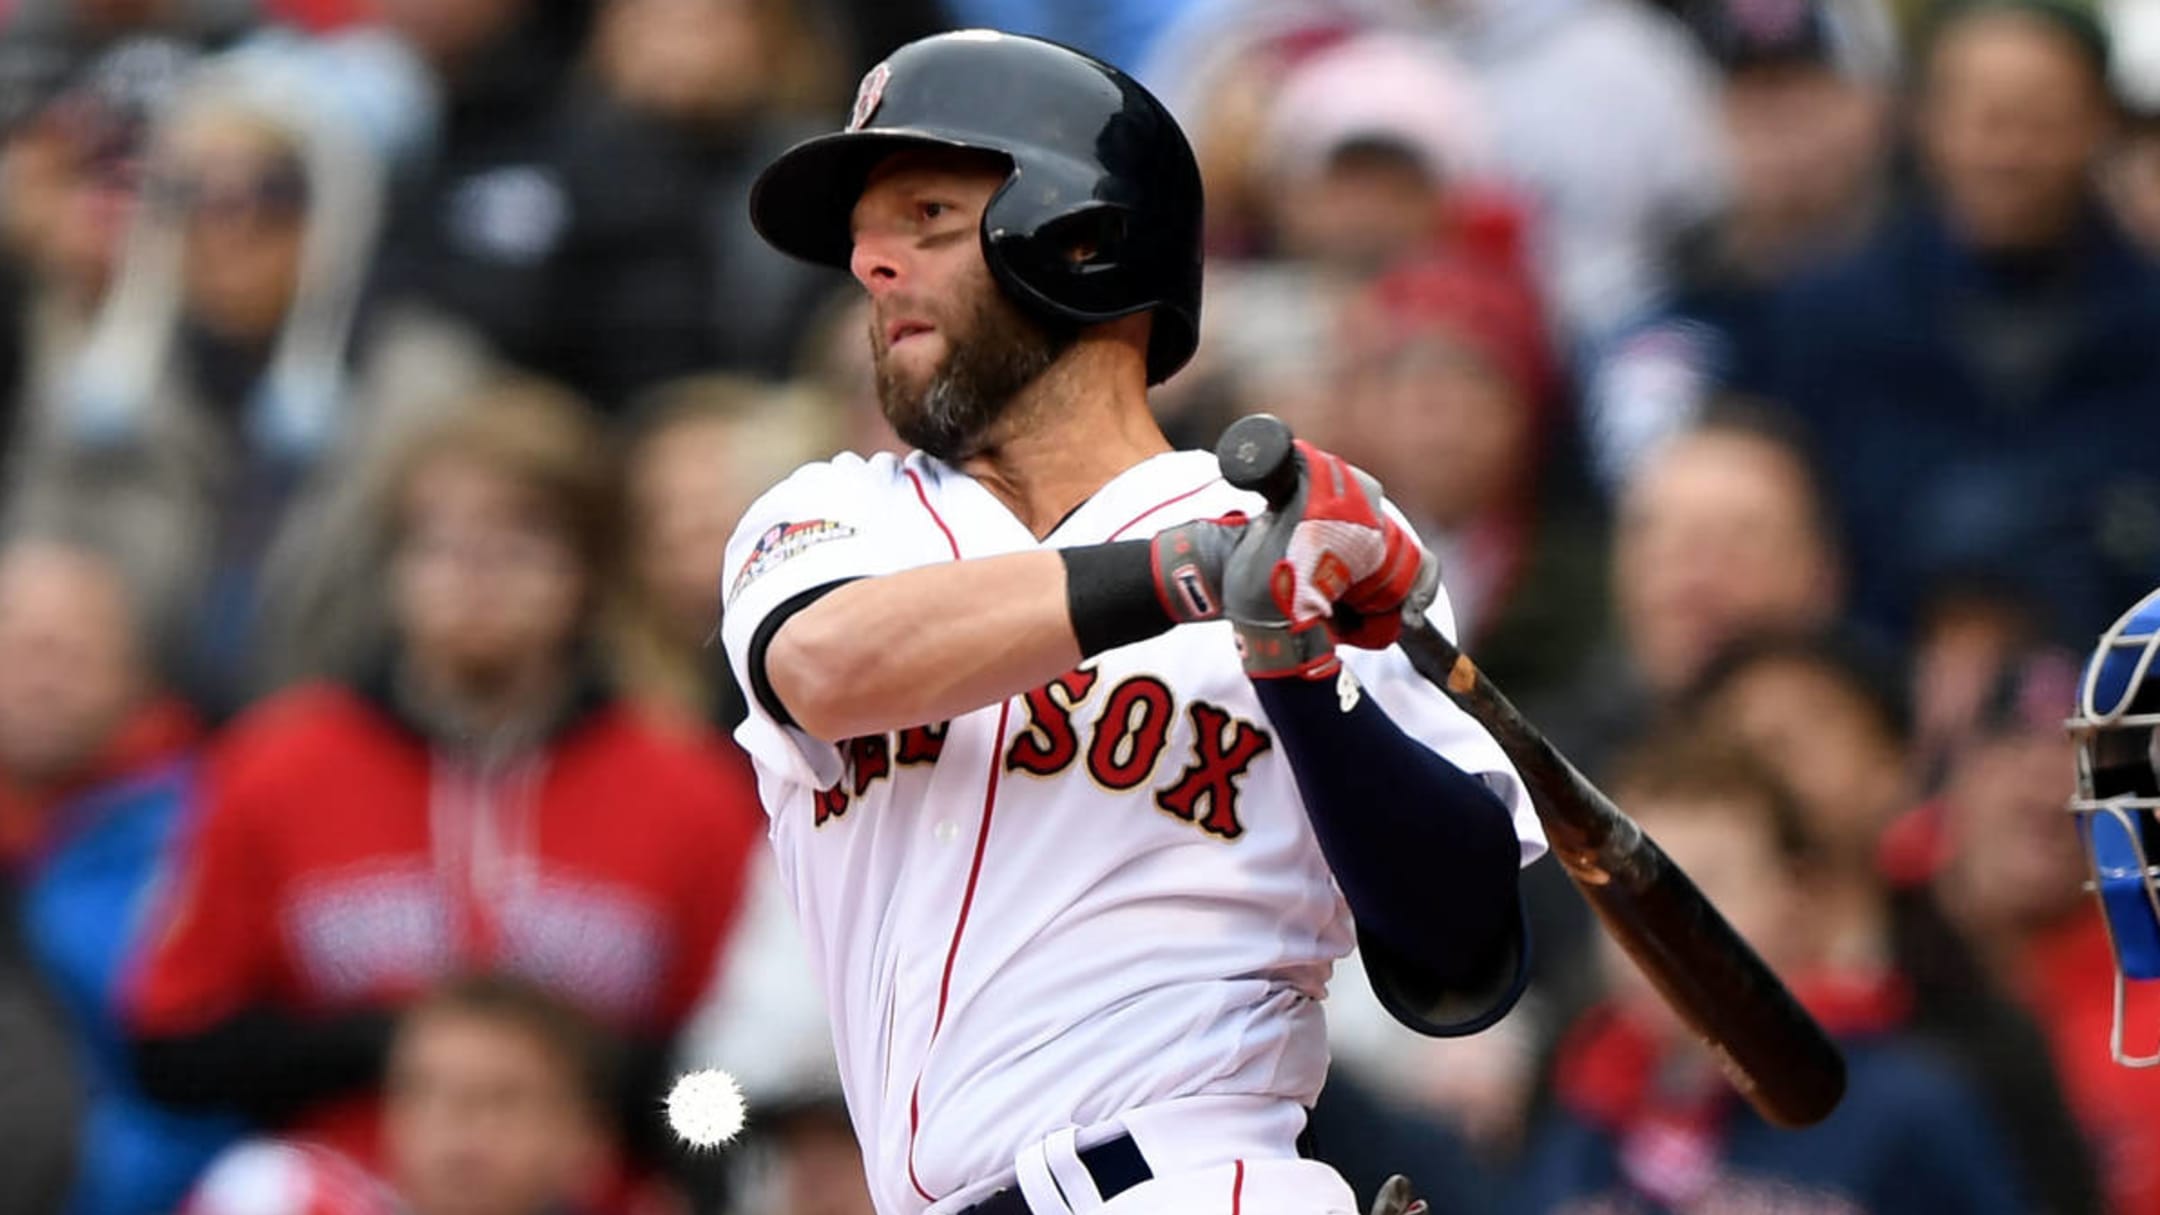 Red Sox to honor retired 2nd baseman Dustin Pedroia